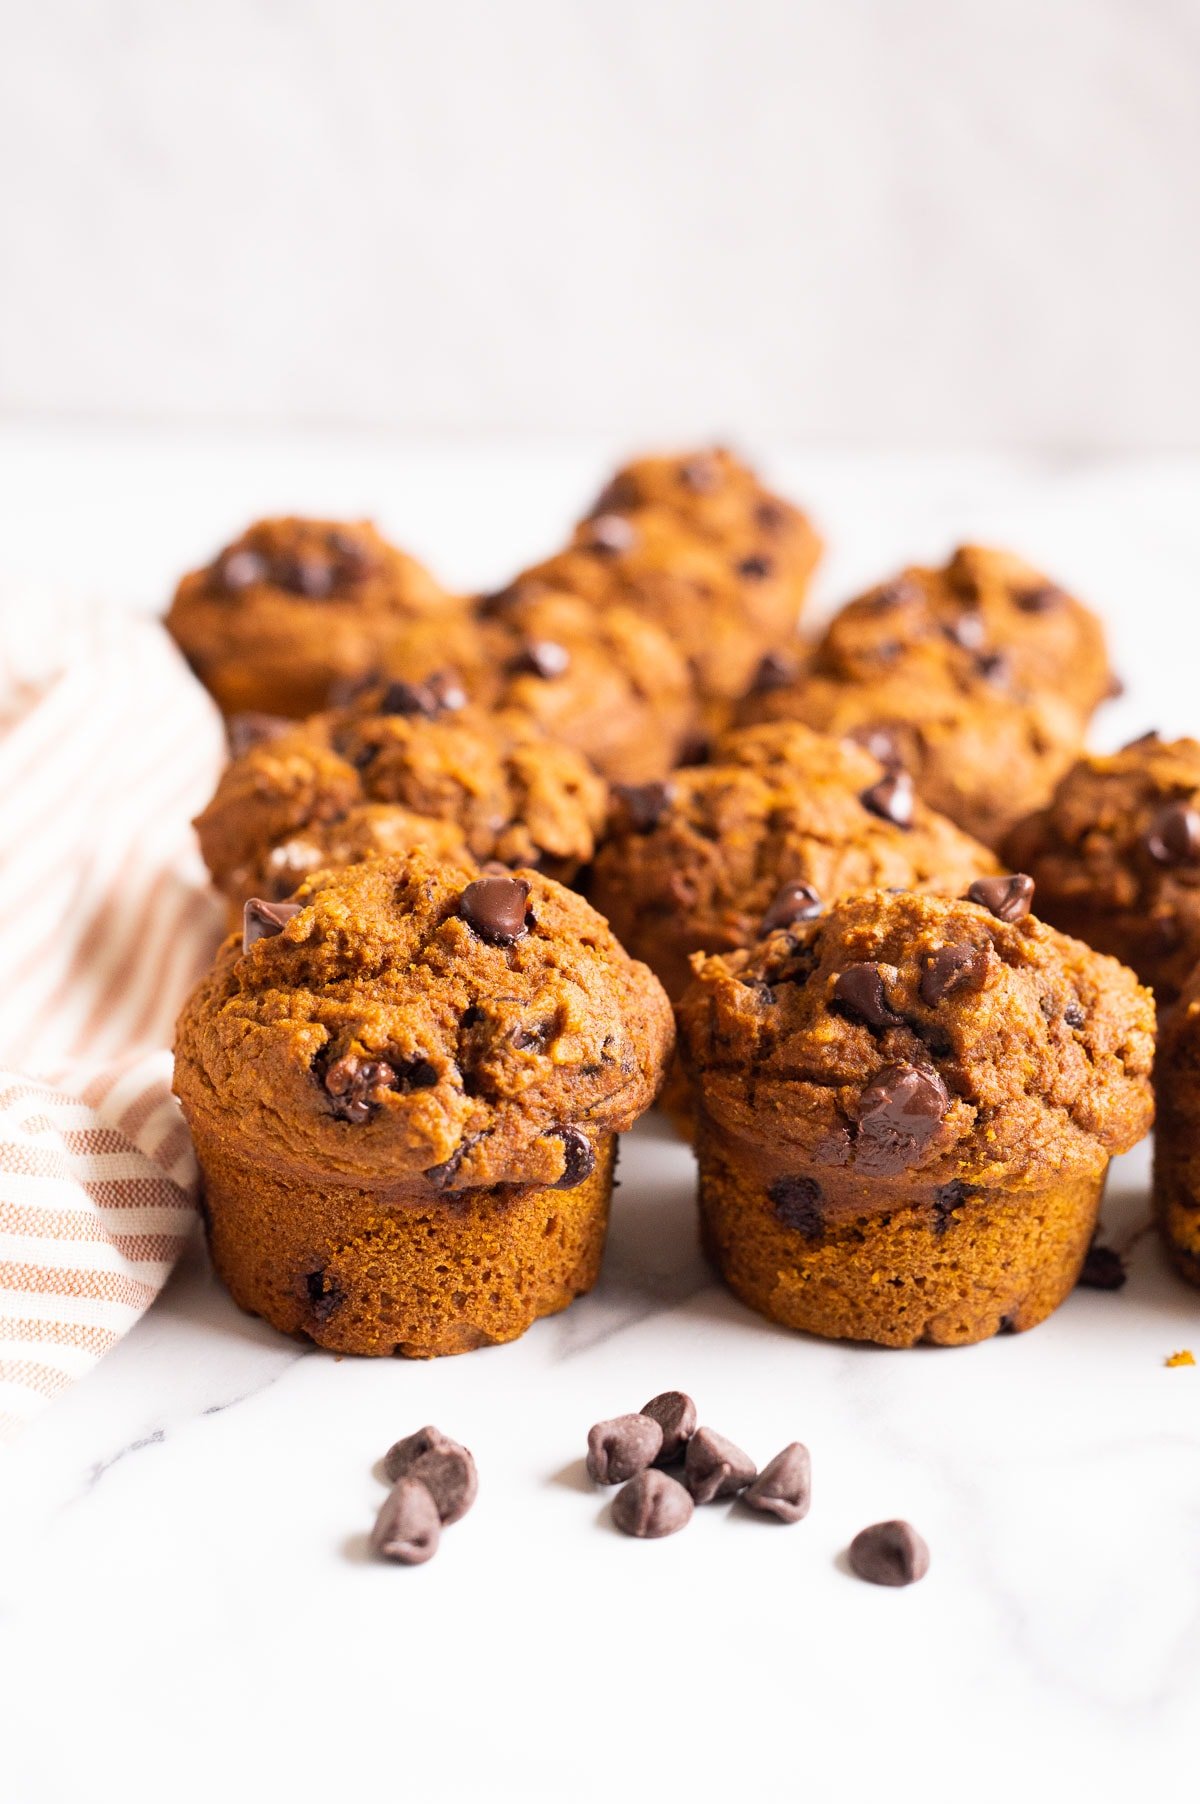 12 pumpkin chocolate chip muffins and a few chocolate chips around them with linen towel on a countertop.